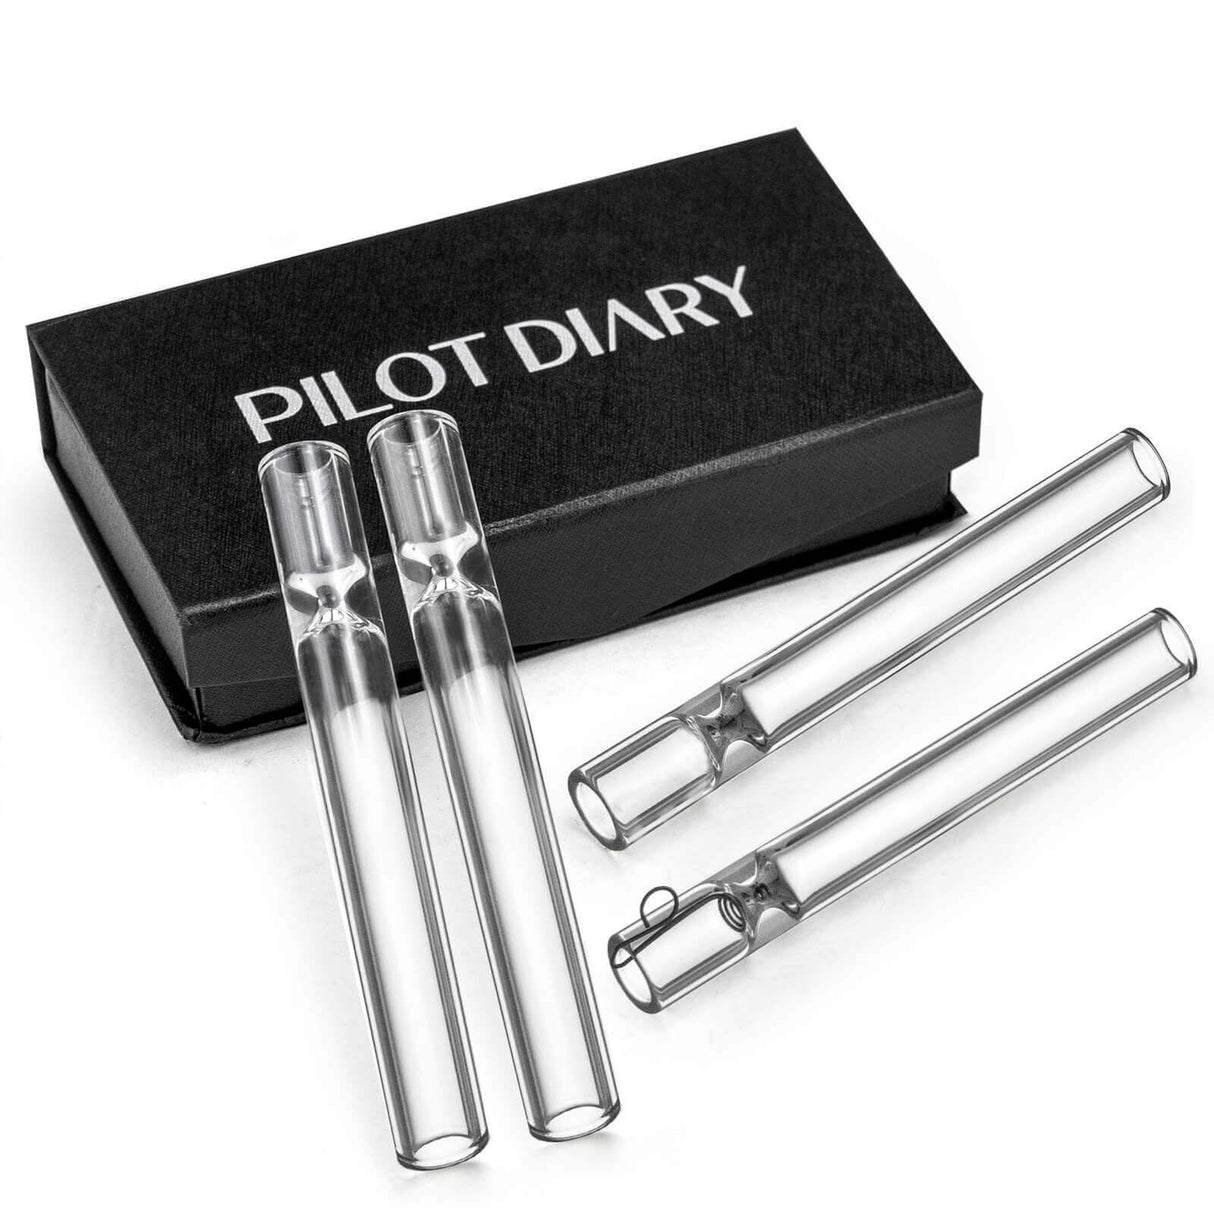 PILOT DIARY Glass One Hitter with Metal Screen, Easy to Clean, Portable Size